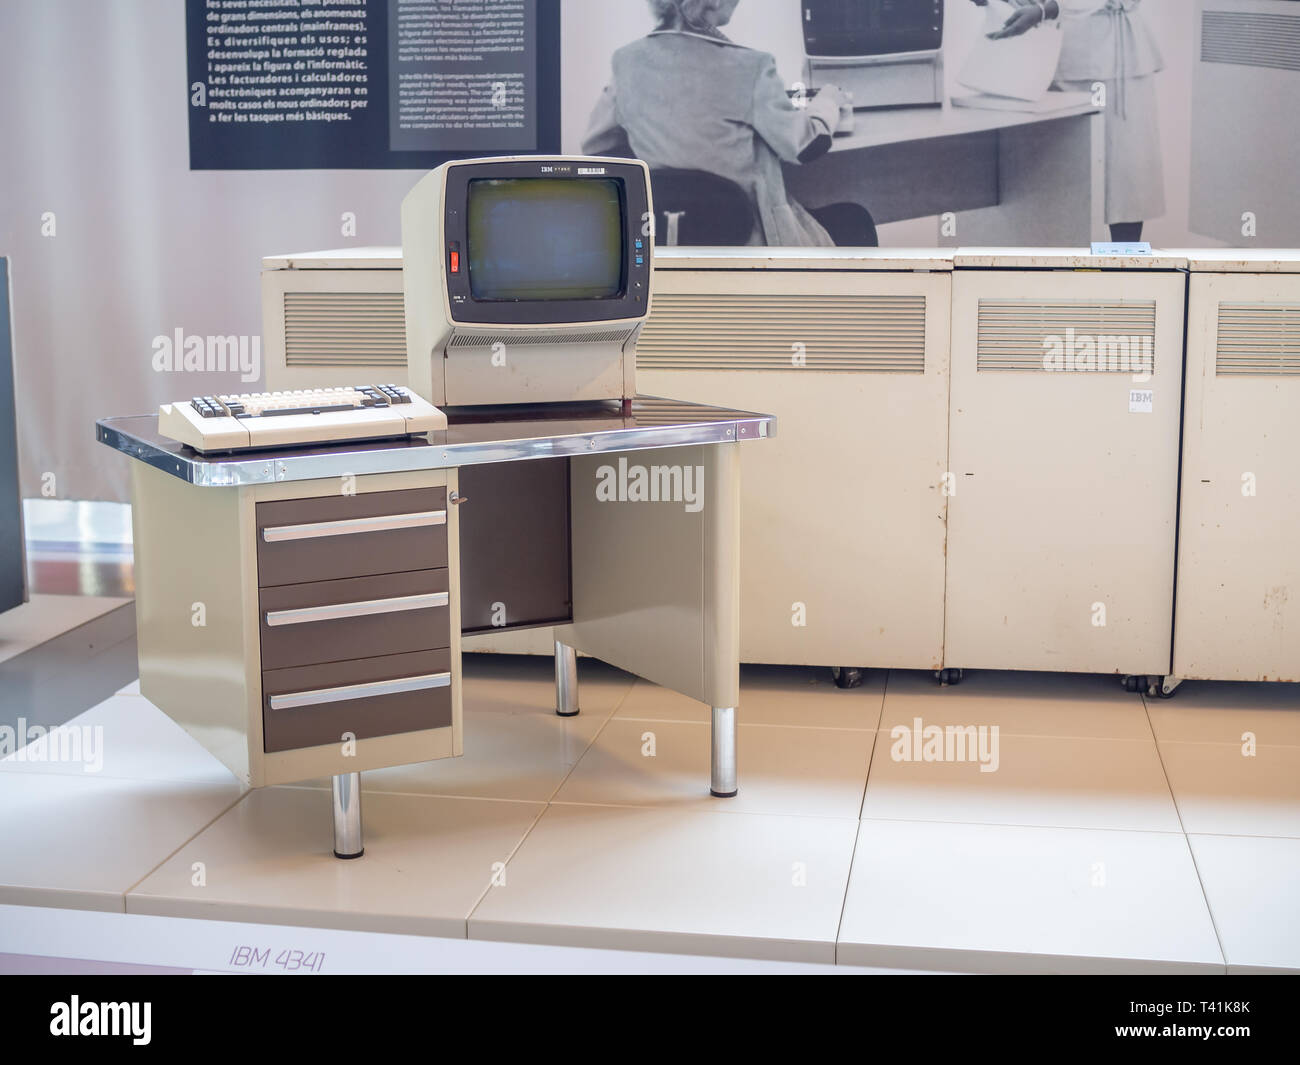 TERRASSA, SPAIN-MARCH 19, 2019: Monitor and keyboard of 1979 IBM 4341 System in the National Museum of Science and Technology of Catalonia Stock Photo